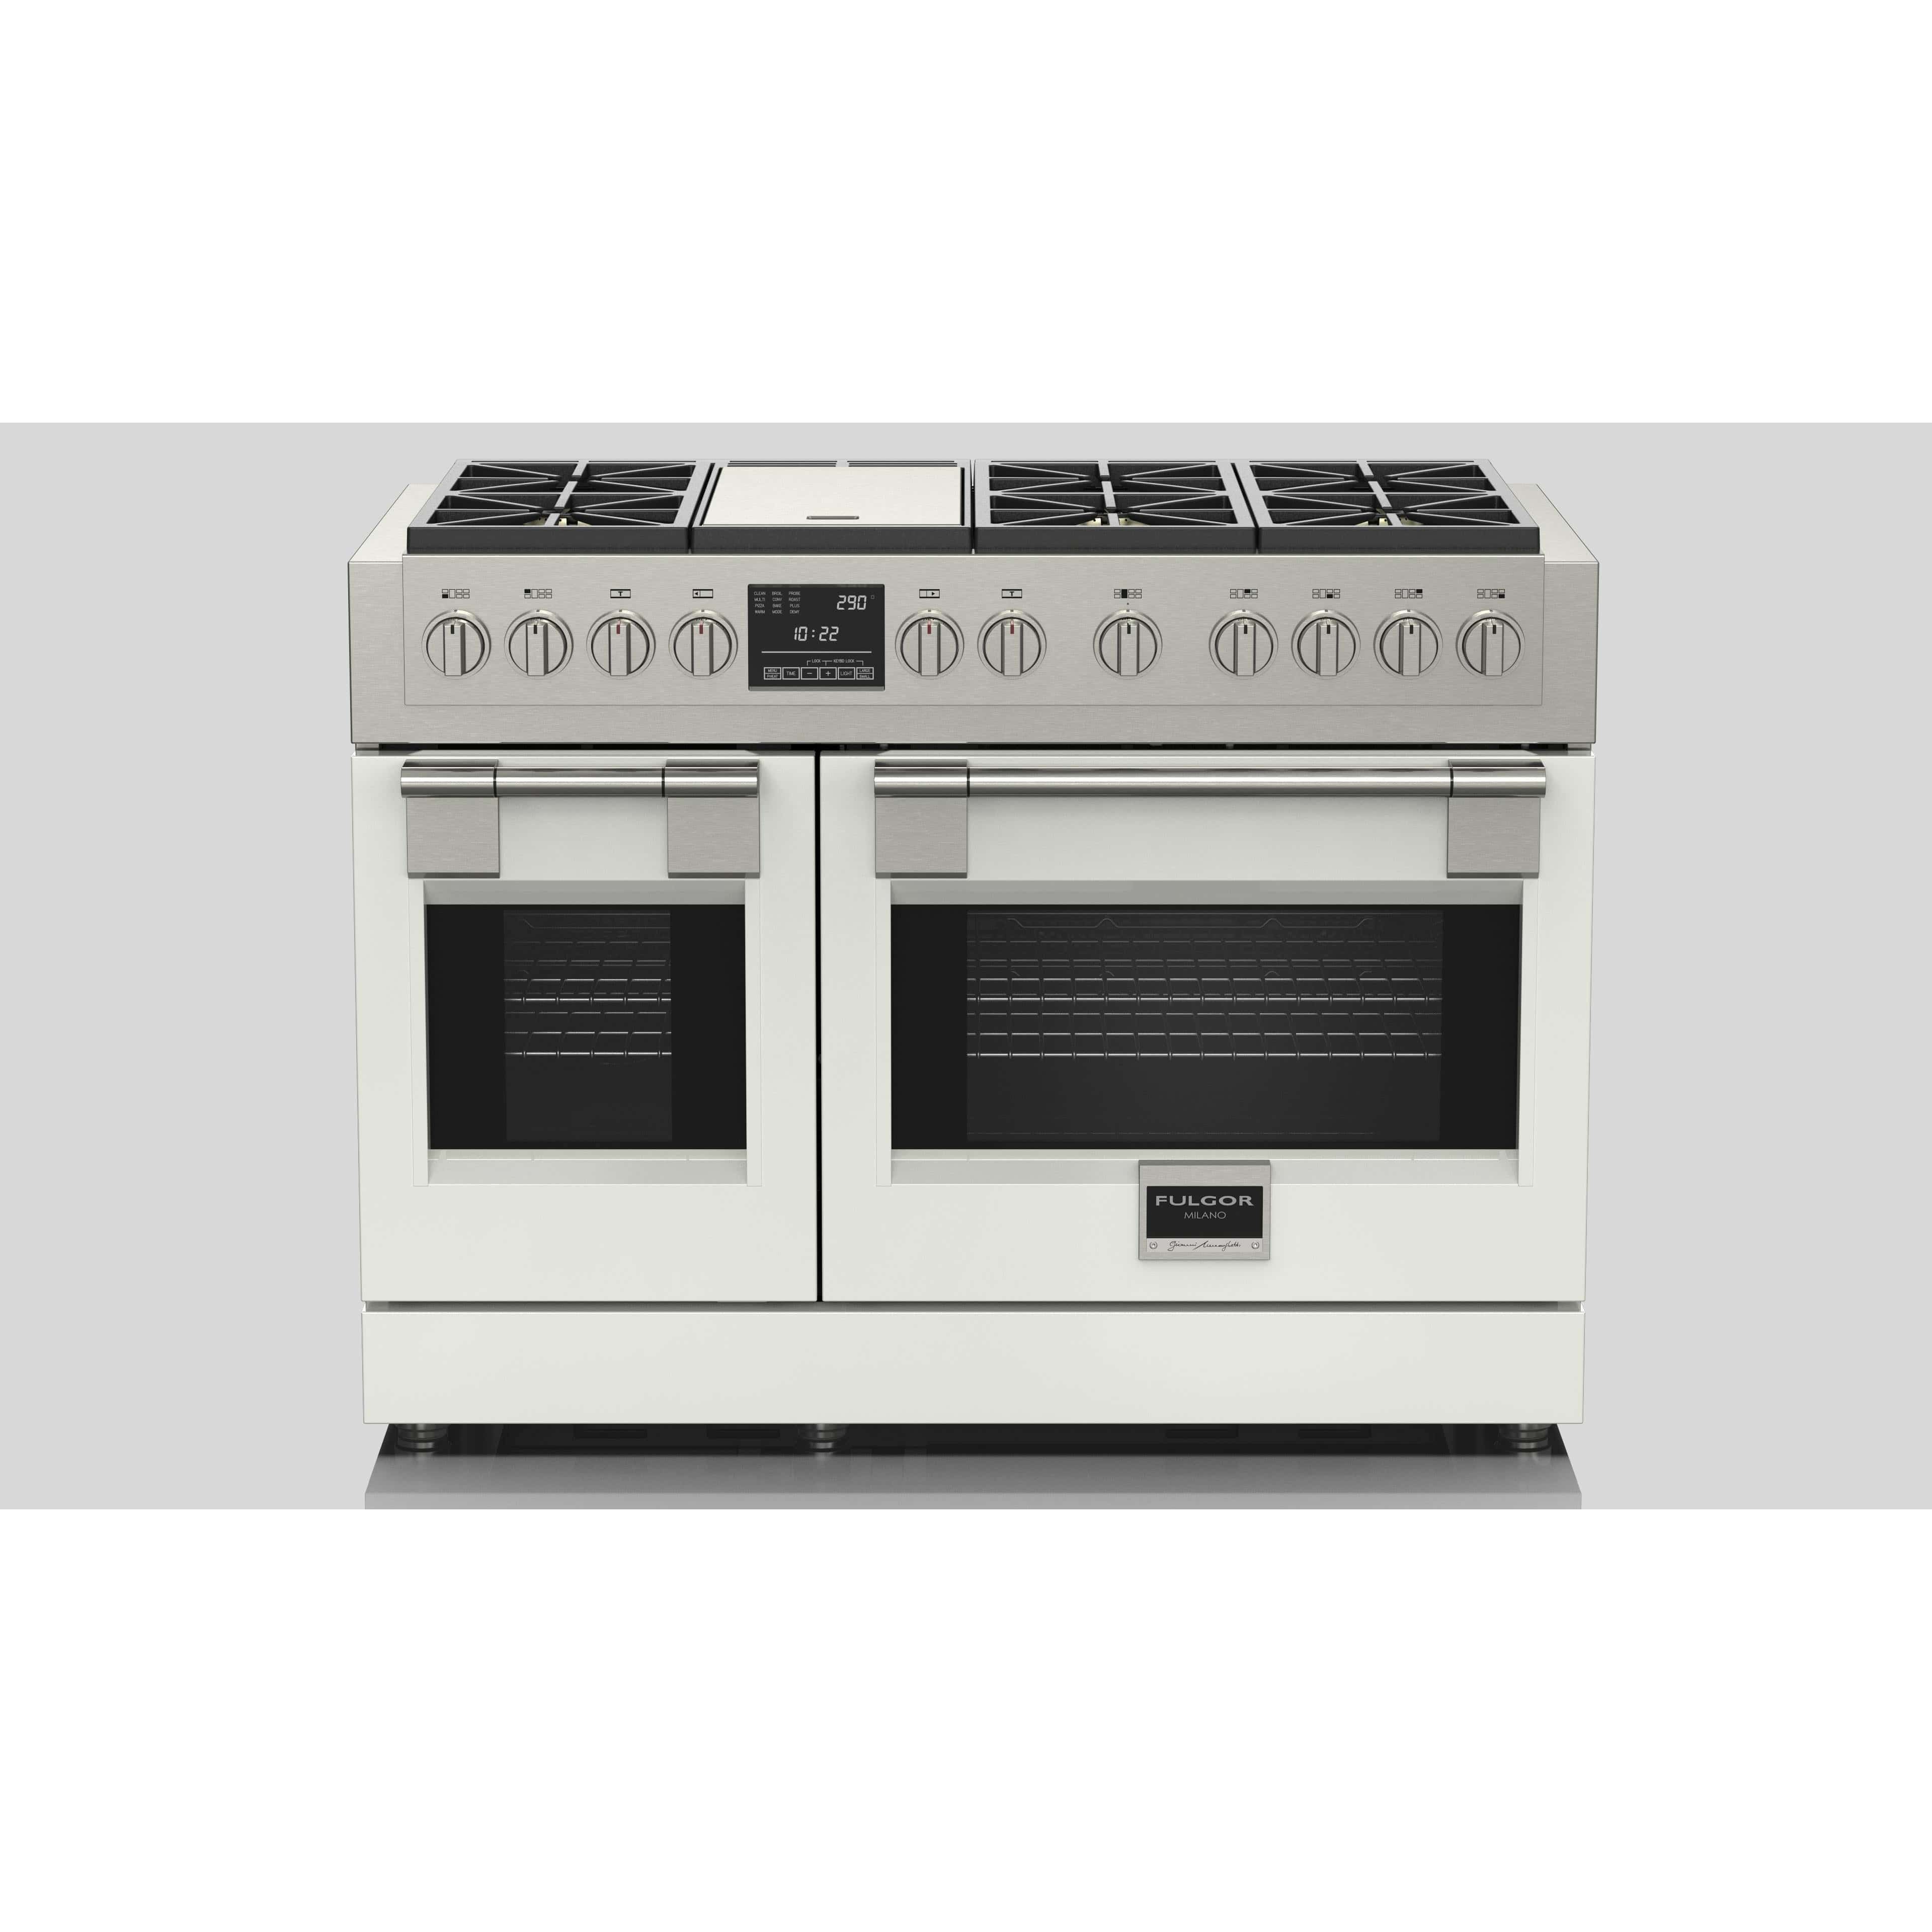 Fulgor Milano 48" Dual Fuel Professional Range with 6 Dual Flame Burners,  6.5 Cu. Ft. Total Capacity Stainless Steel - F6PDF486GS1 Ranges F6PDF486GS1 + PDRKIT48WH Luxury Appliances Direct